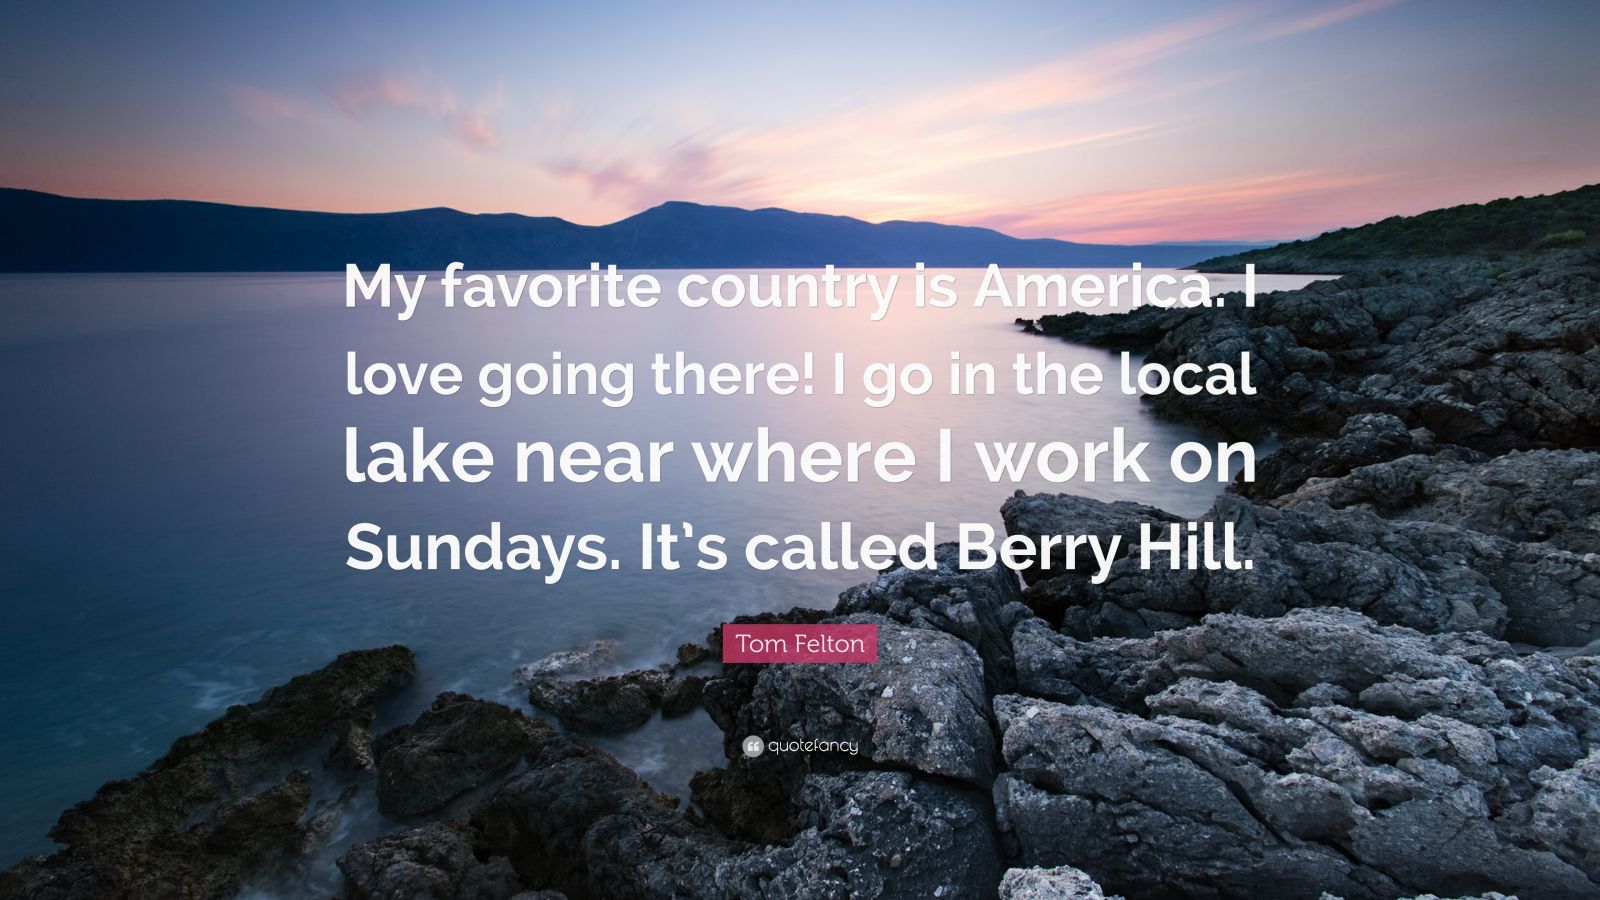 https://quotefancy.com/media/wallpaper/1600x900/4182007-Tom-Felton-Quote-My-favorite-country-is-America-I-love-going-there.jpg